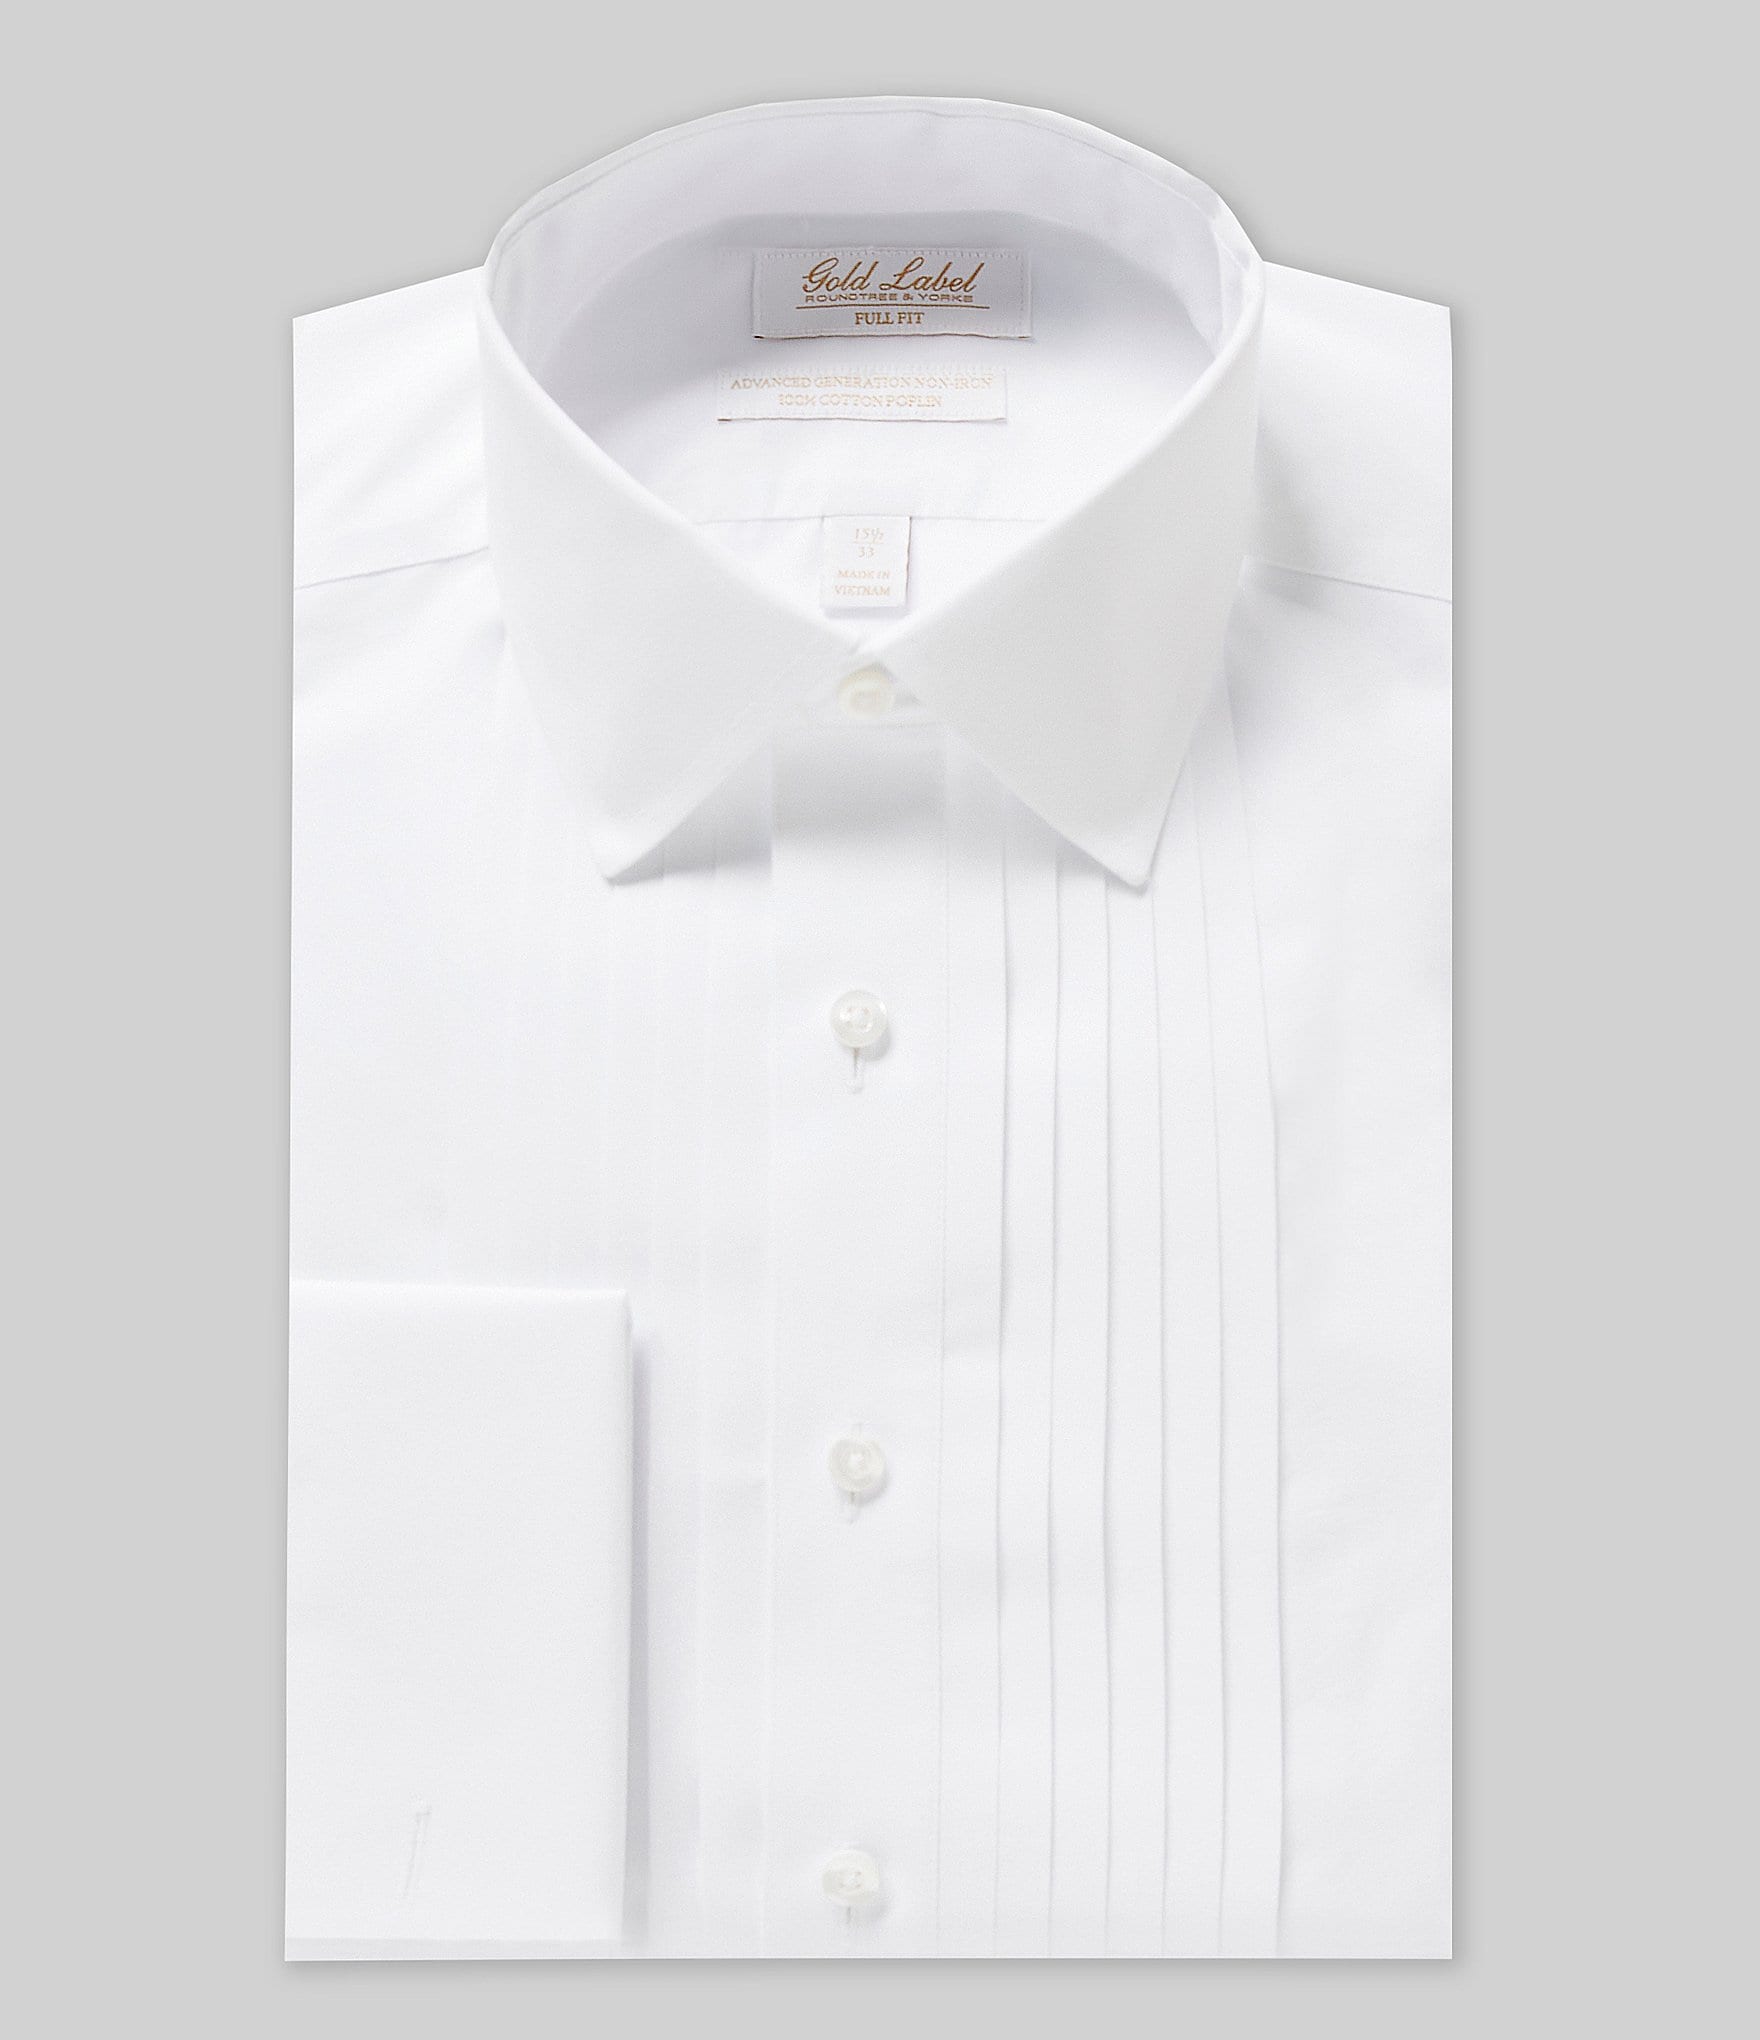 Roundtree & Yorke Gold Label Roundtree & Yorke Full-Fit Non-Iron Spread  Collar Solid Dress Shirt